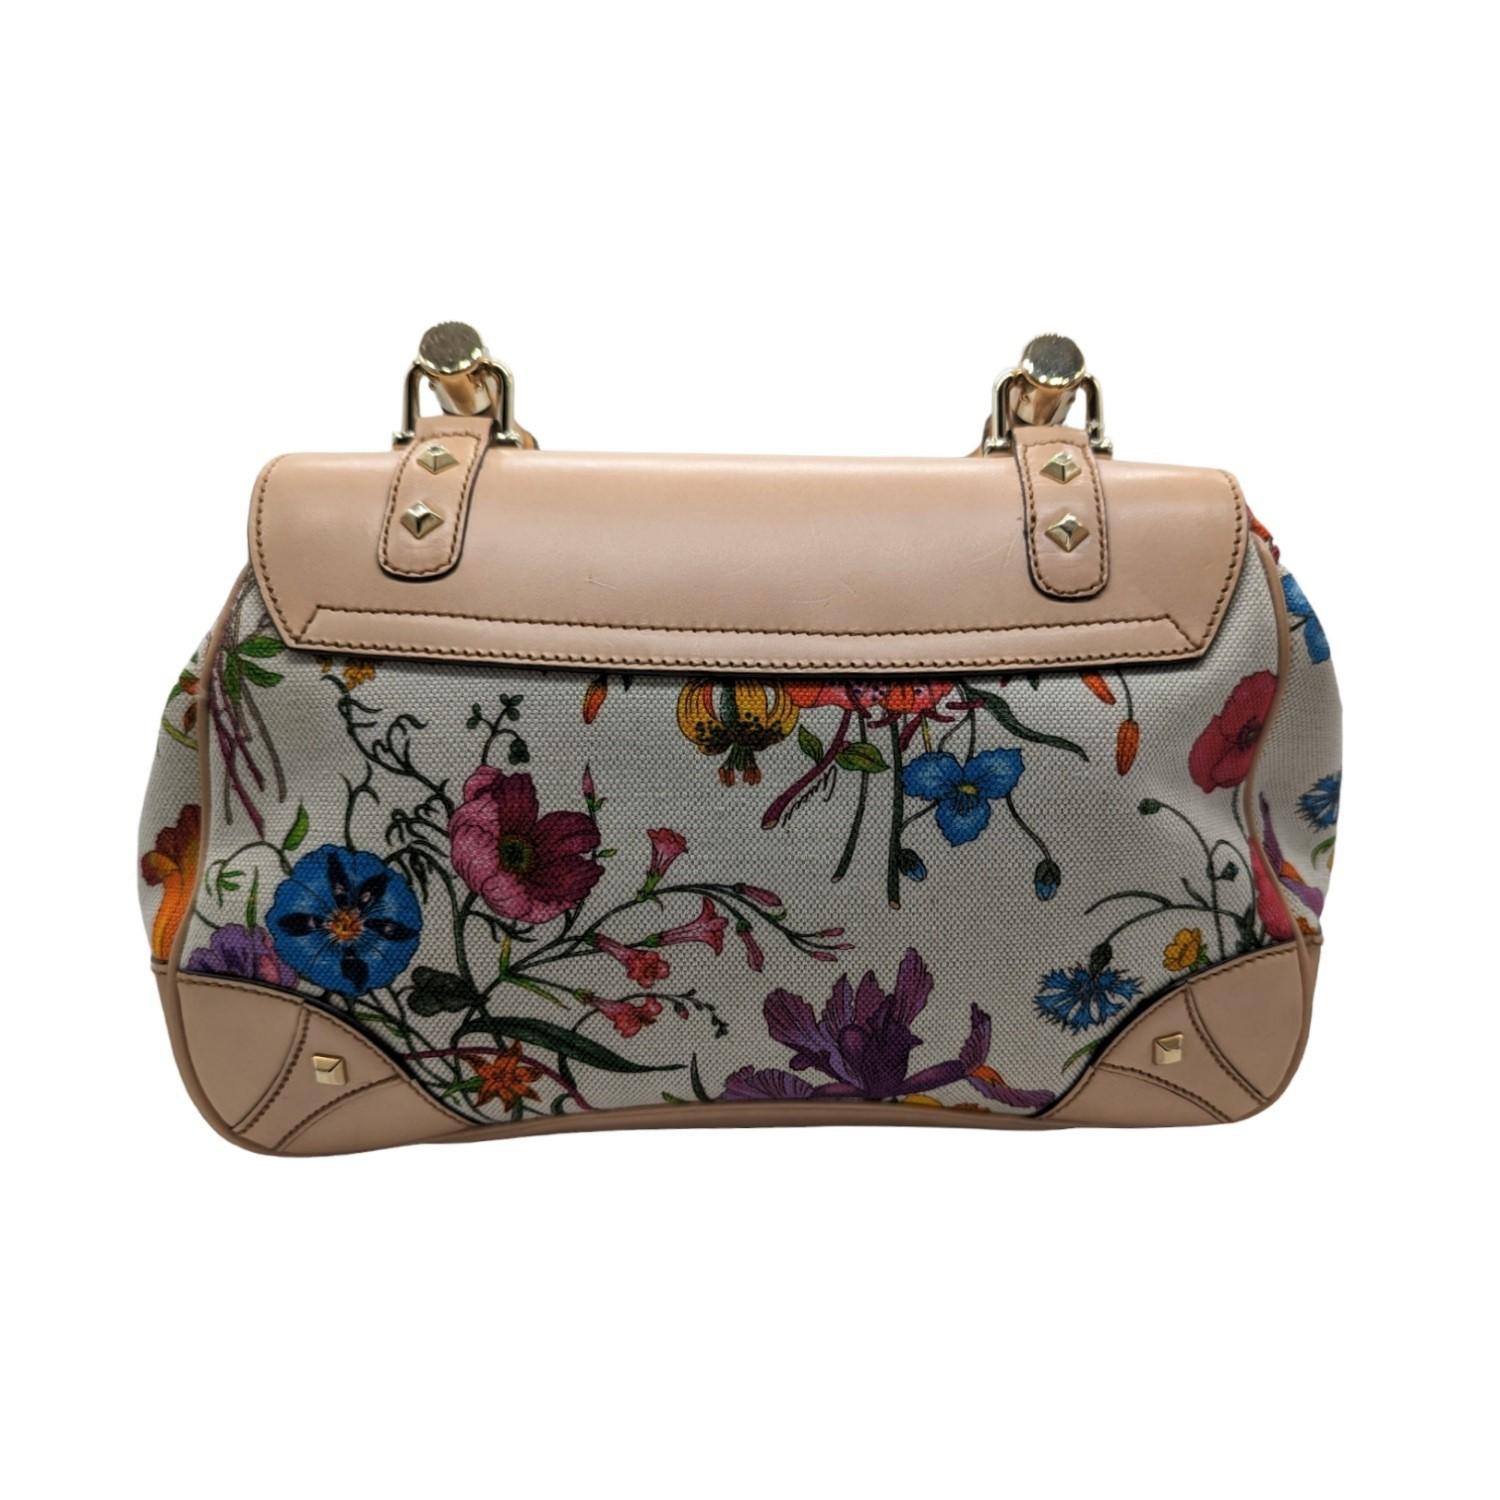 Gucci Canvas Floral Flora Bamboo Handle Bag. This stylish hobo is beautifully crafted of brightly colored wildflower print on a white canvas. The bag features a natural bamboo handle and polished brass hardware. Front flap bamboo turn-lock opens to